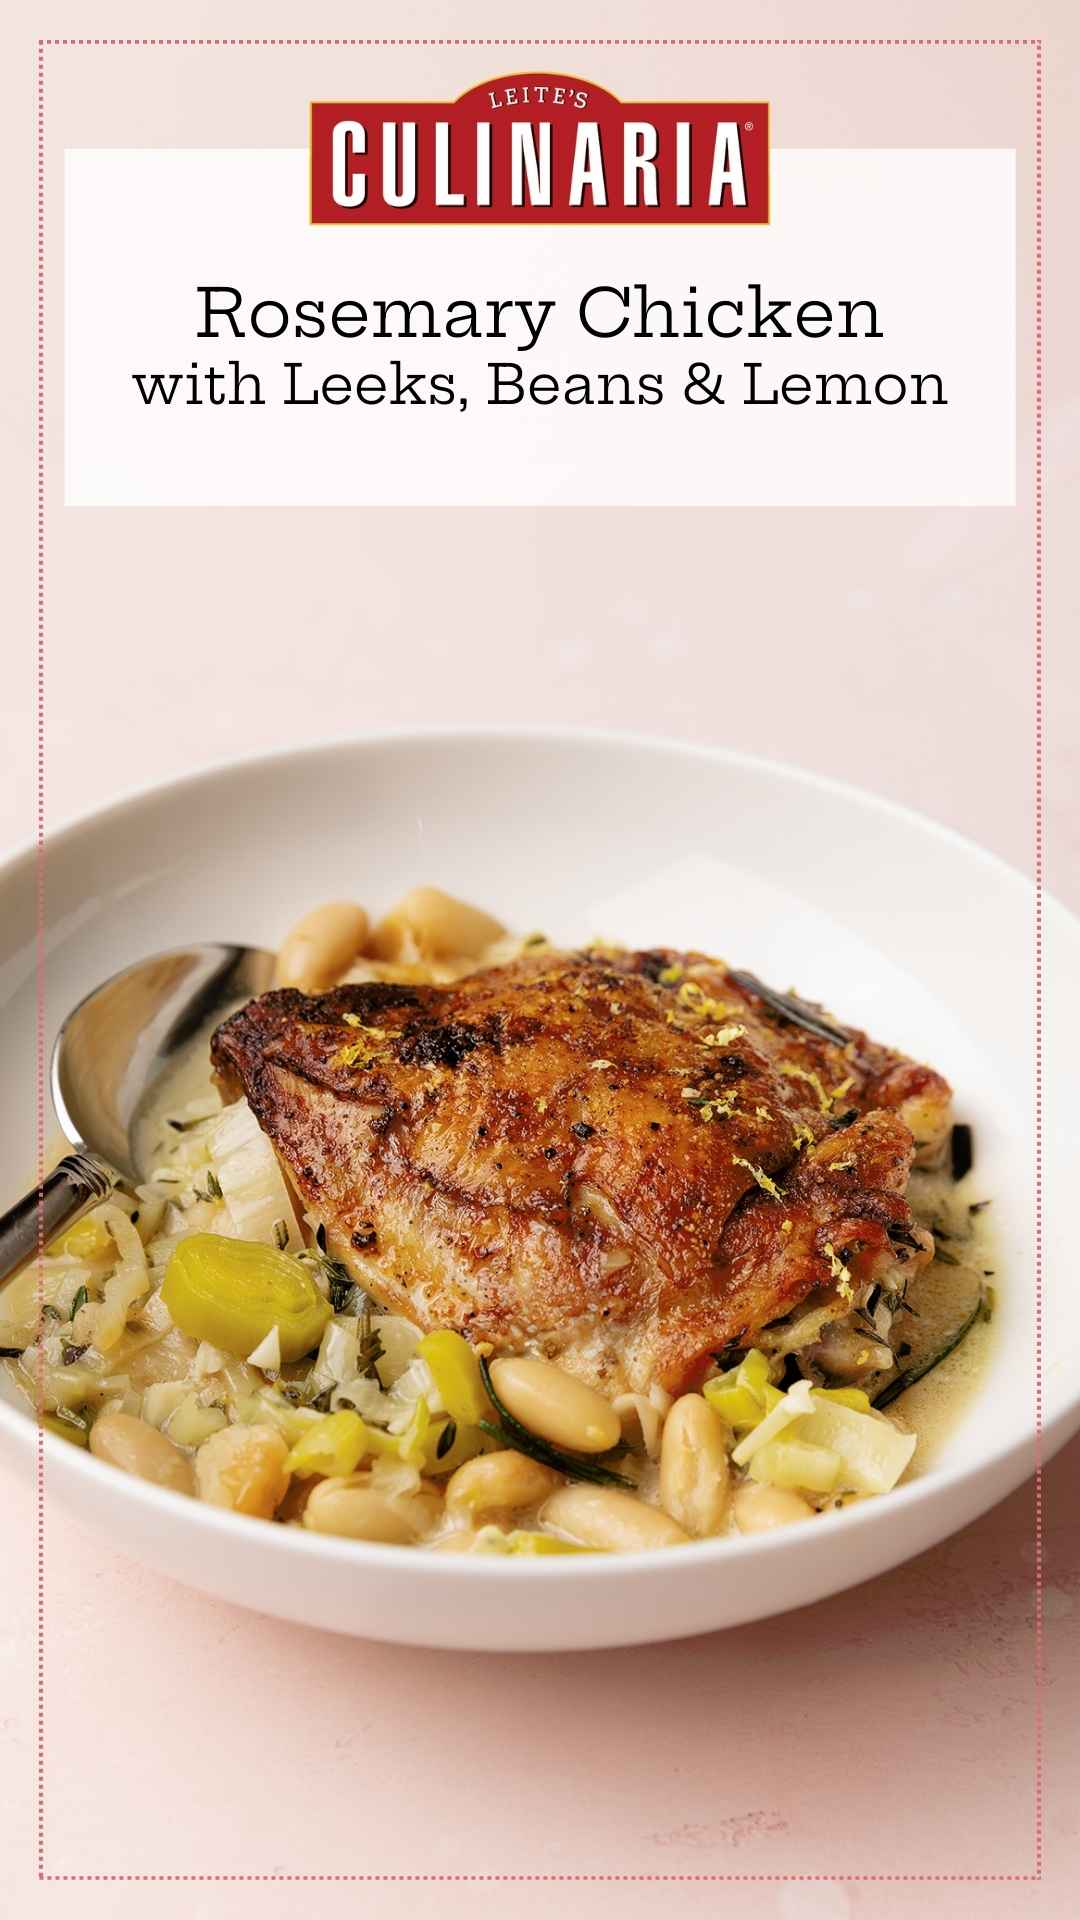 A bowl with one crispy chicken thigh on top of a mixture of leeks and cannellini beans.